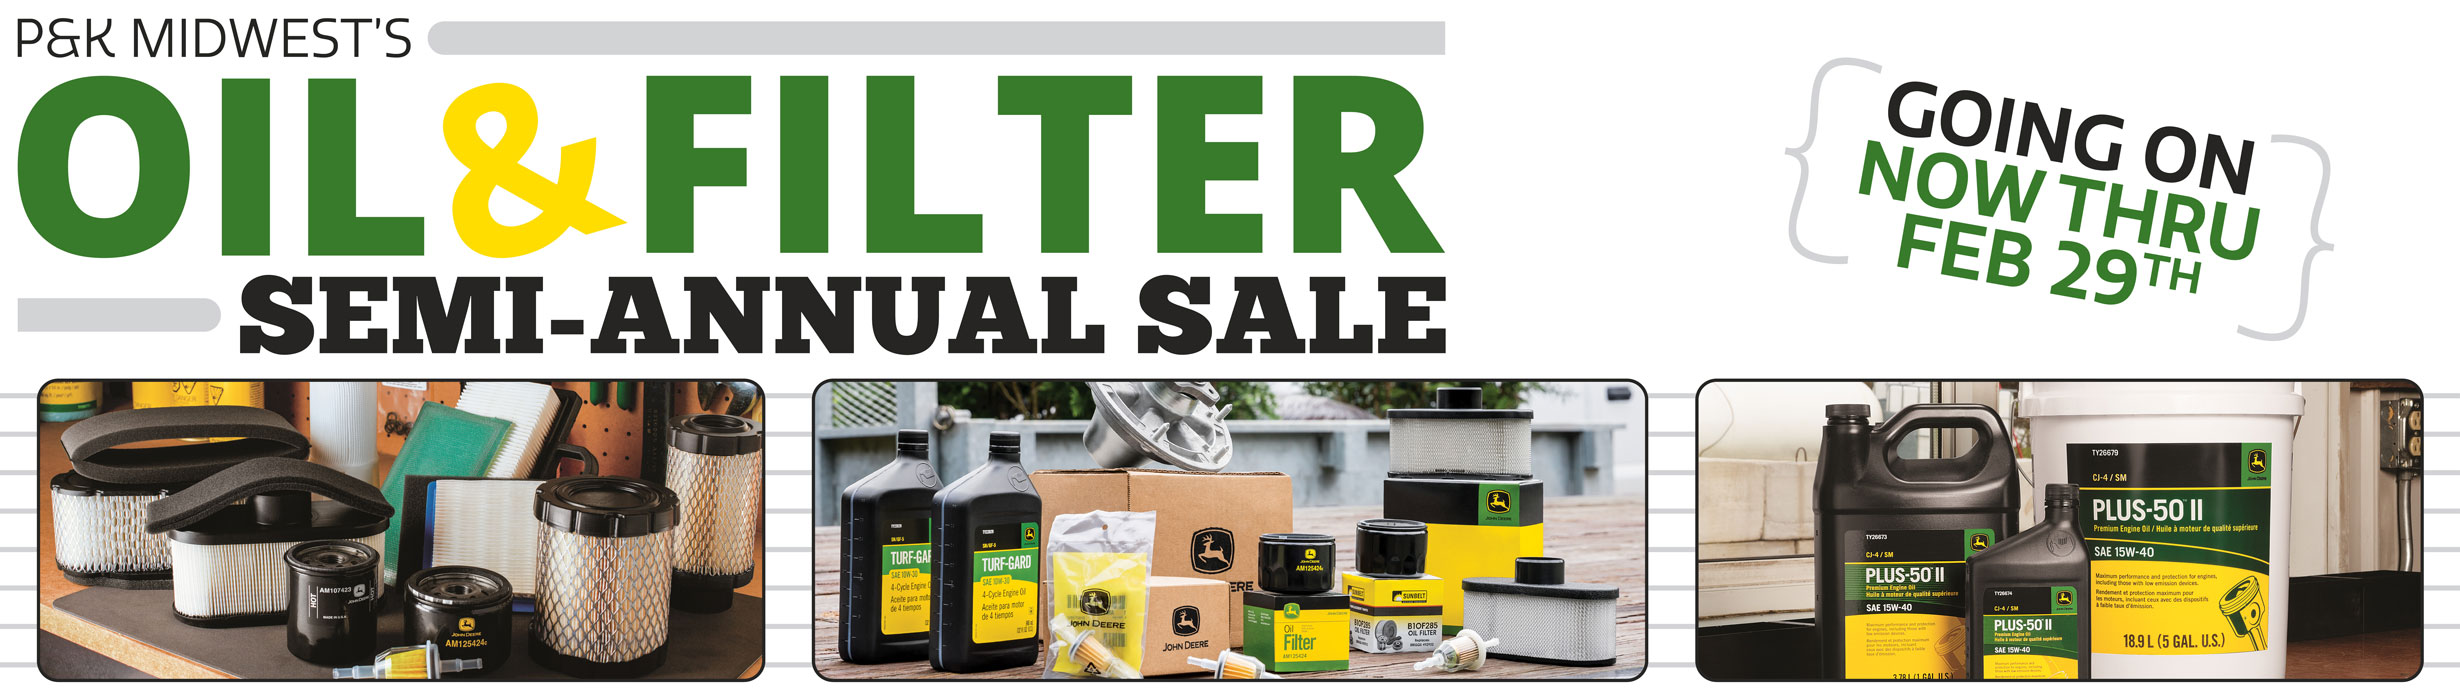 P&K's Semi-Annual Oil & Filter Sale is going on now!